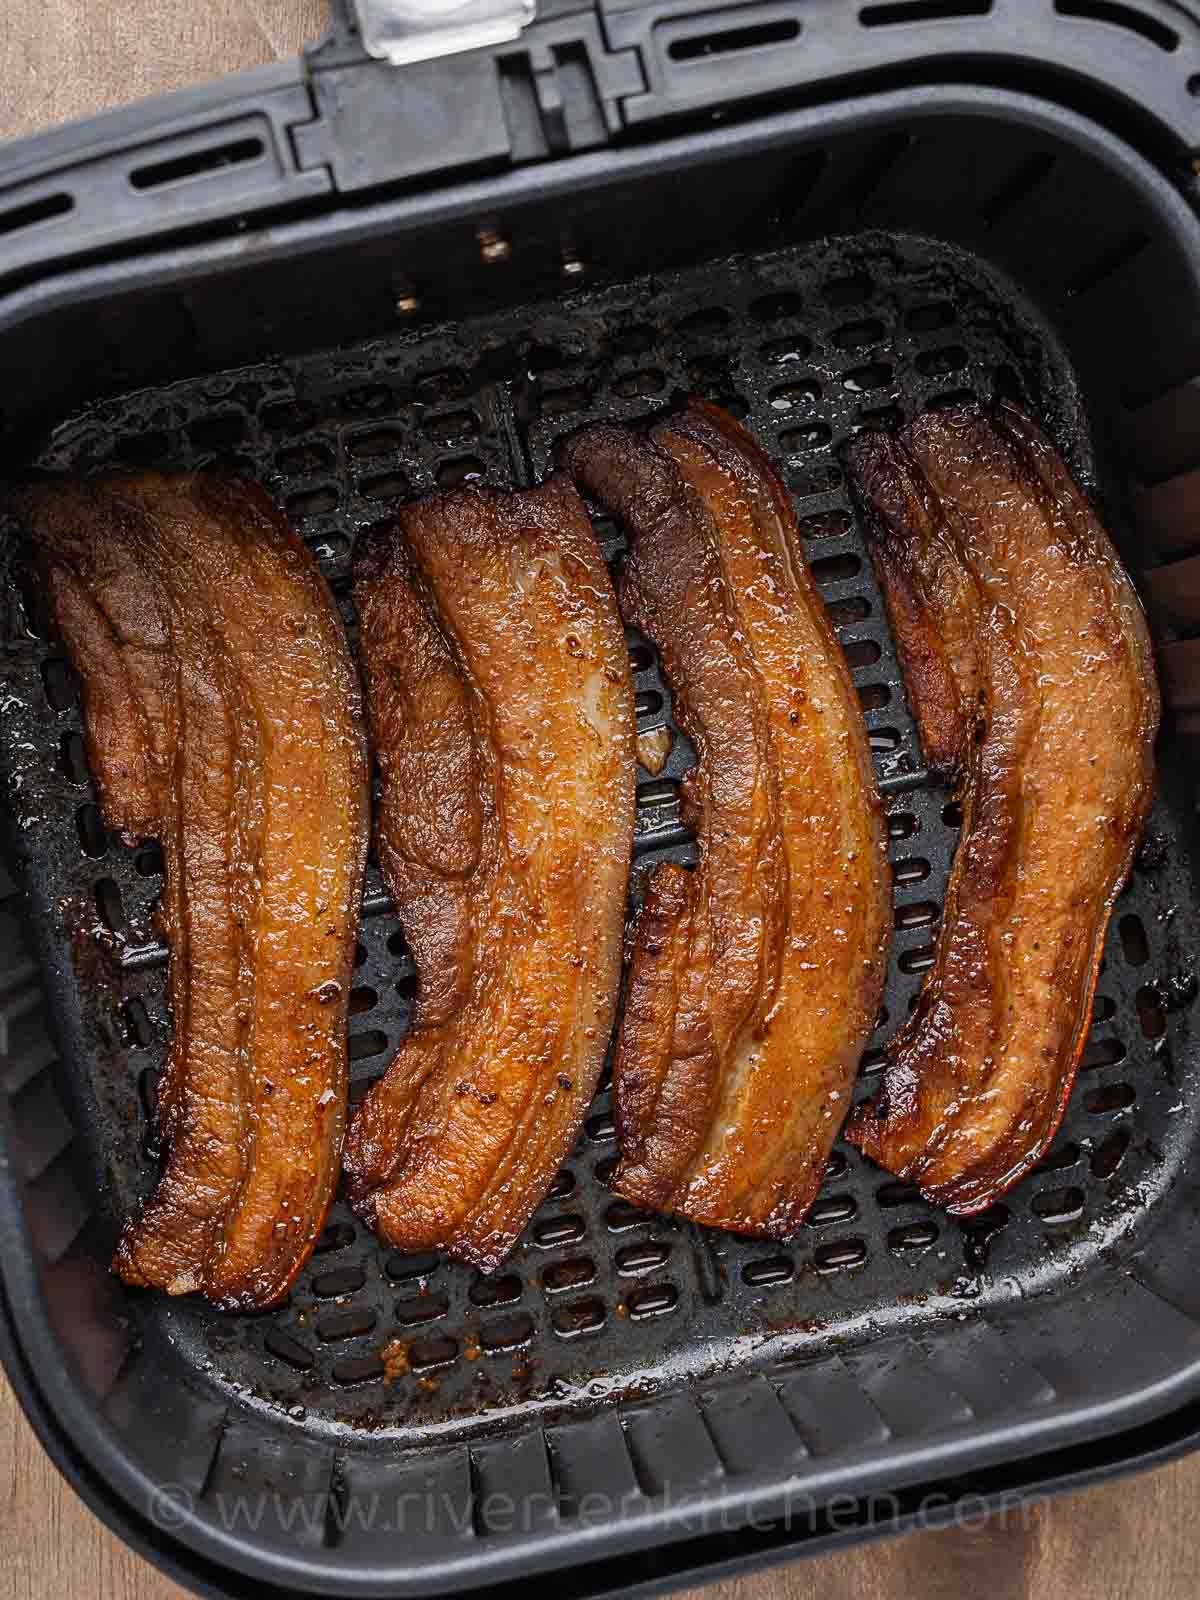 thin slices of marinated pork belly cooked in an air fryer.